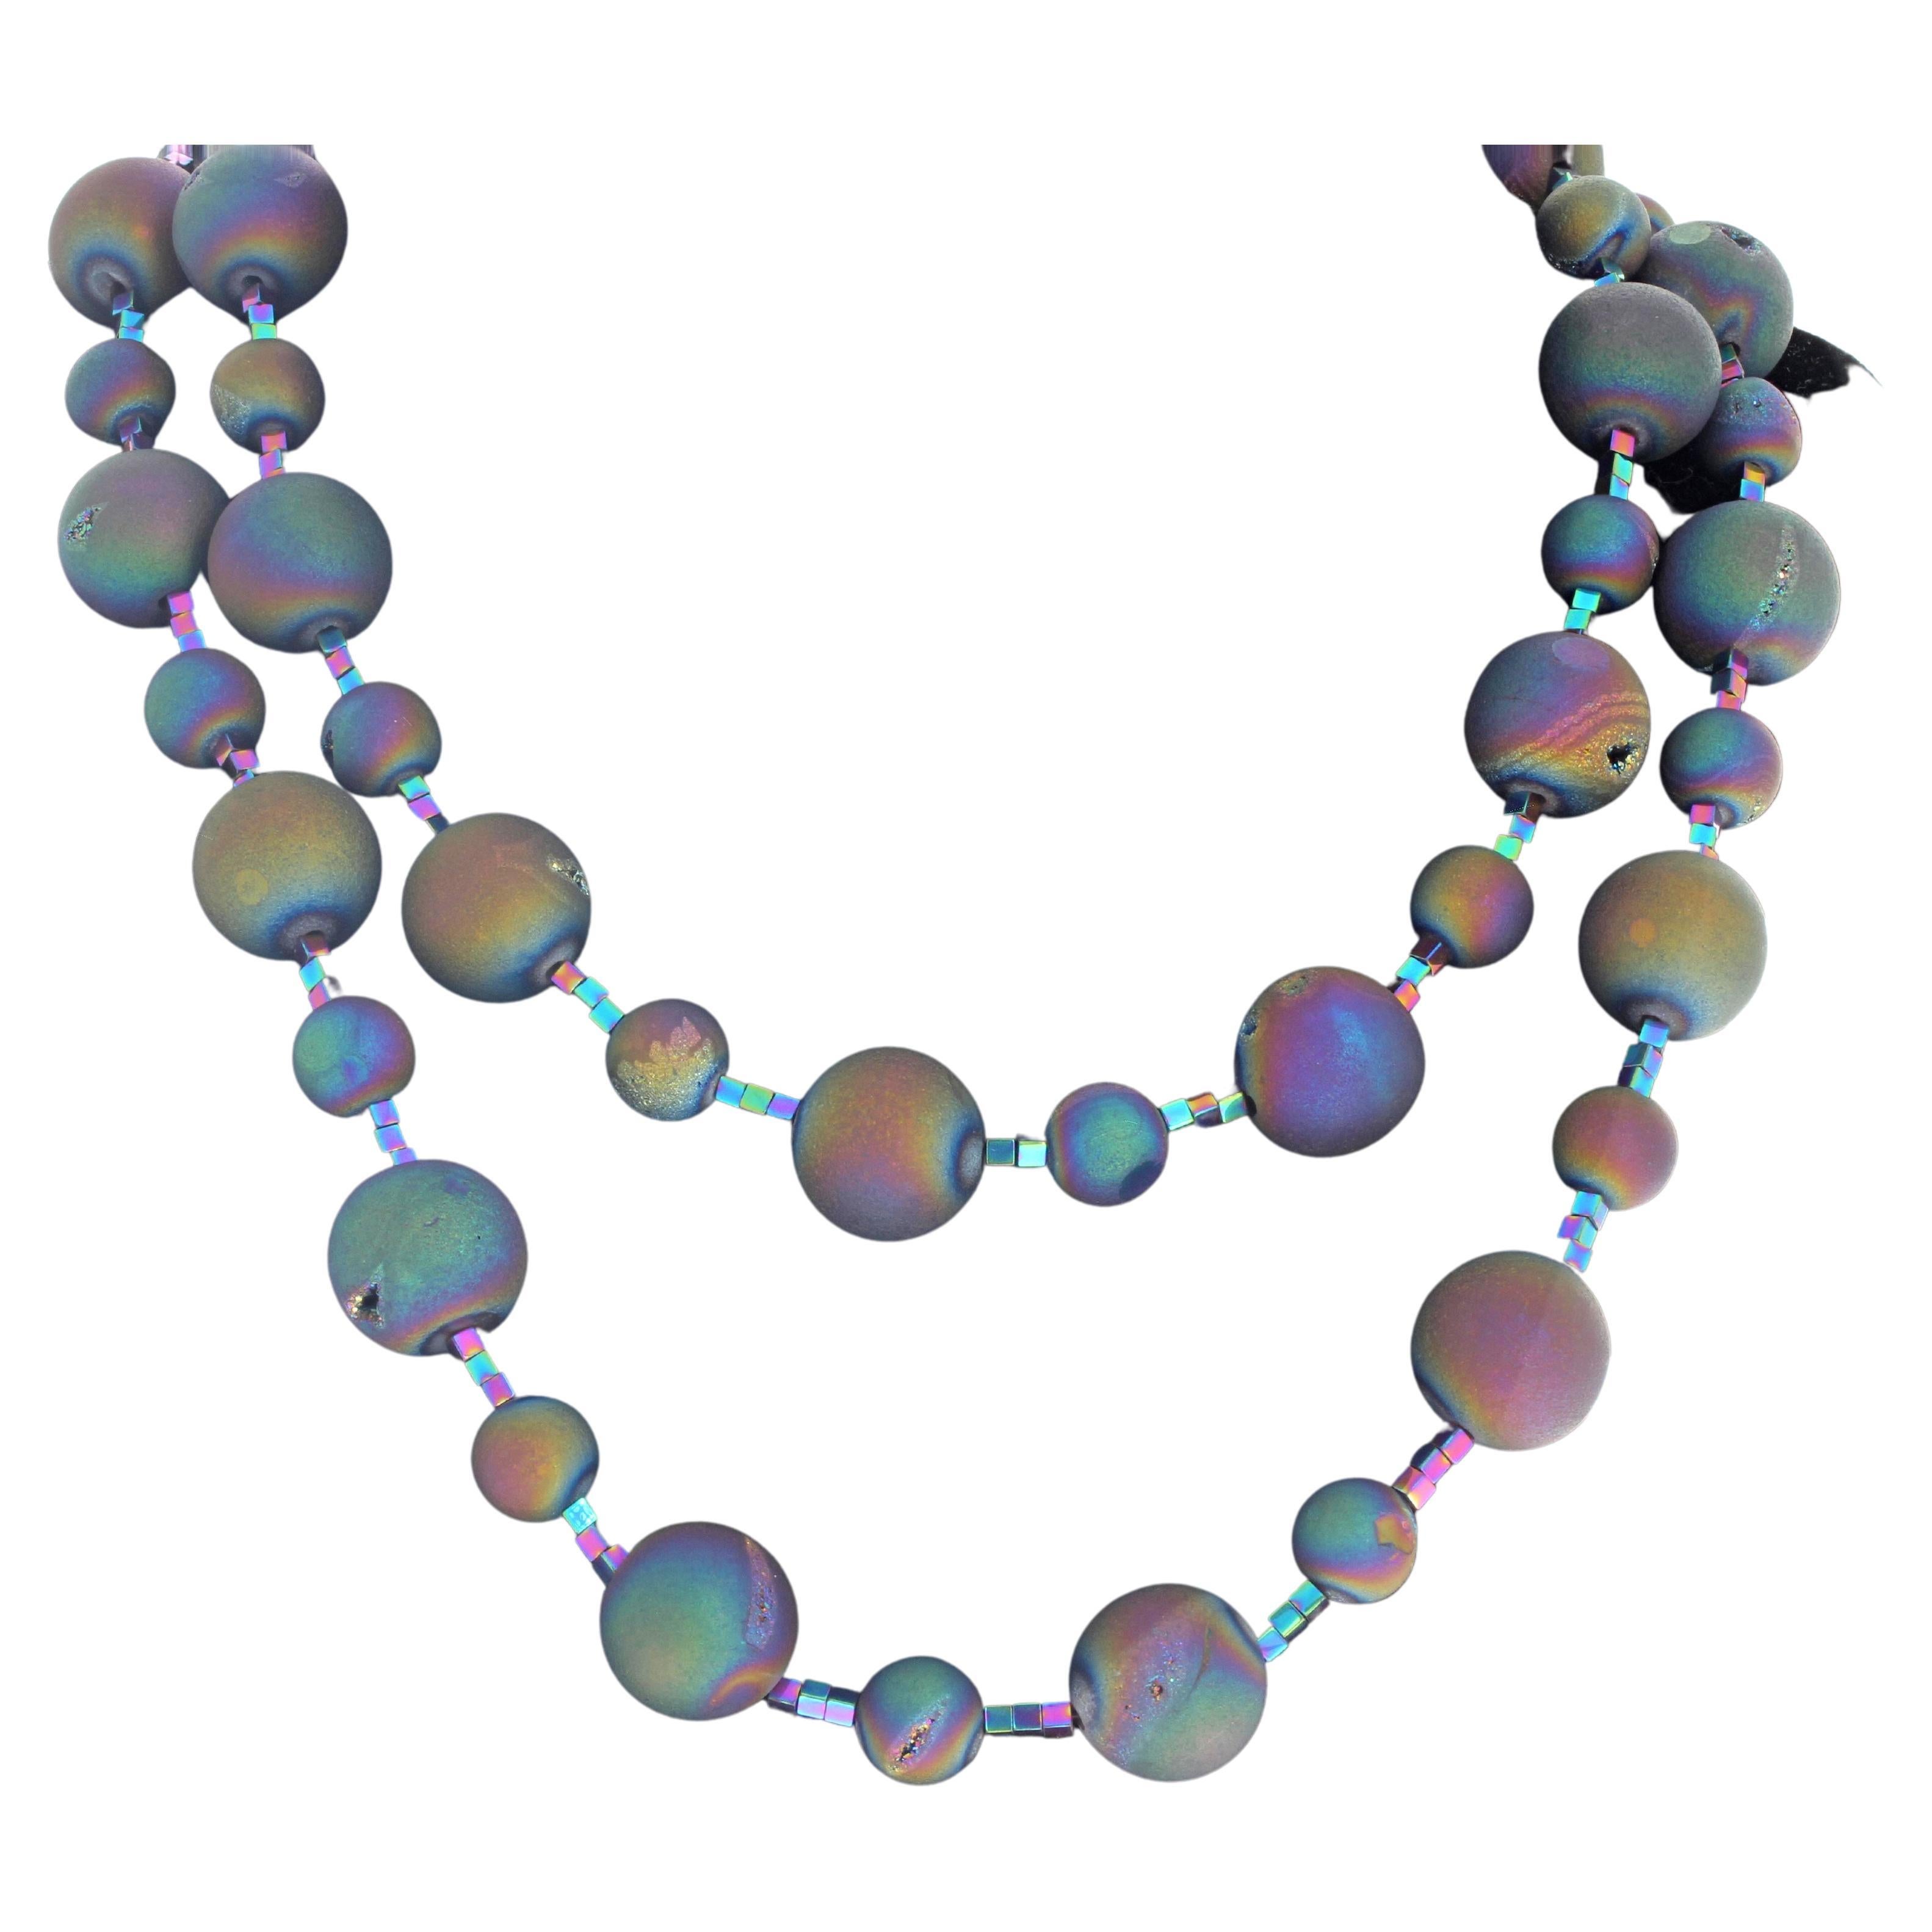 This 40 inches long necklace is absolutely fascinating !  The multi colors of these highly polished round Druzy Quartz rocks are all different.  The large ones are approximately 17mm and the smaller ones approximately 11mm.  They have little snicks